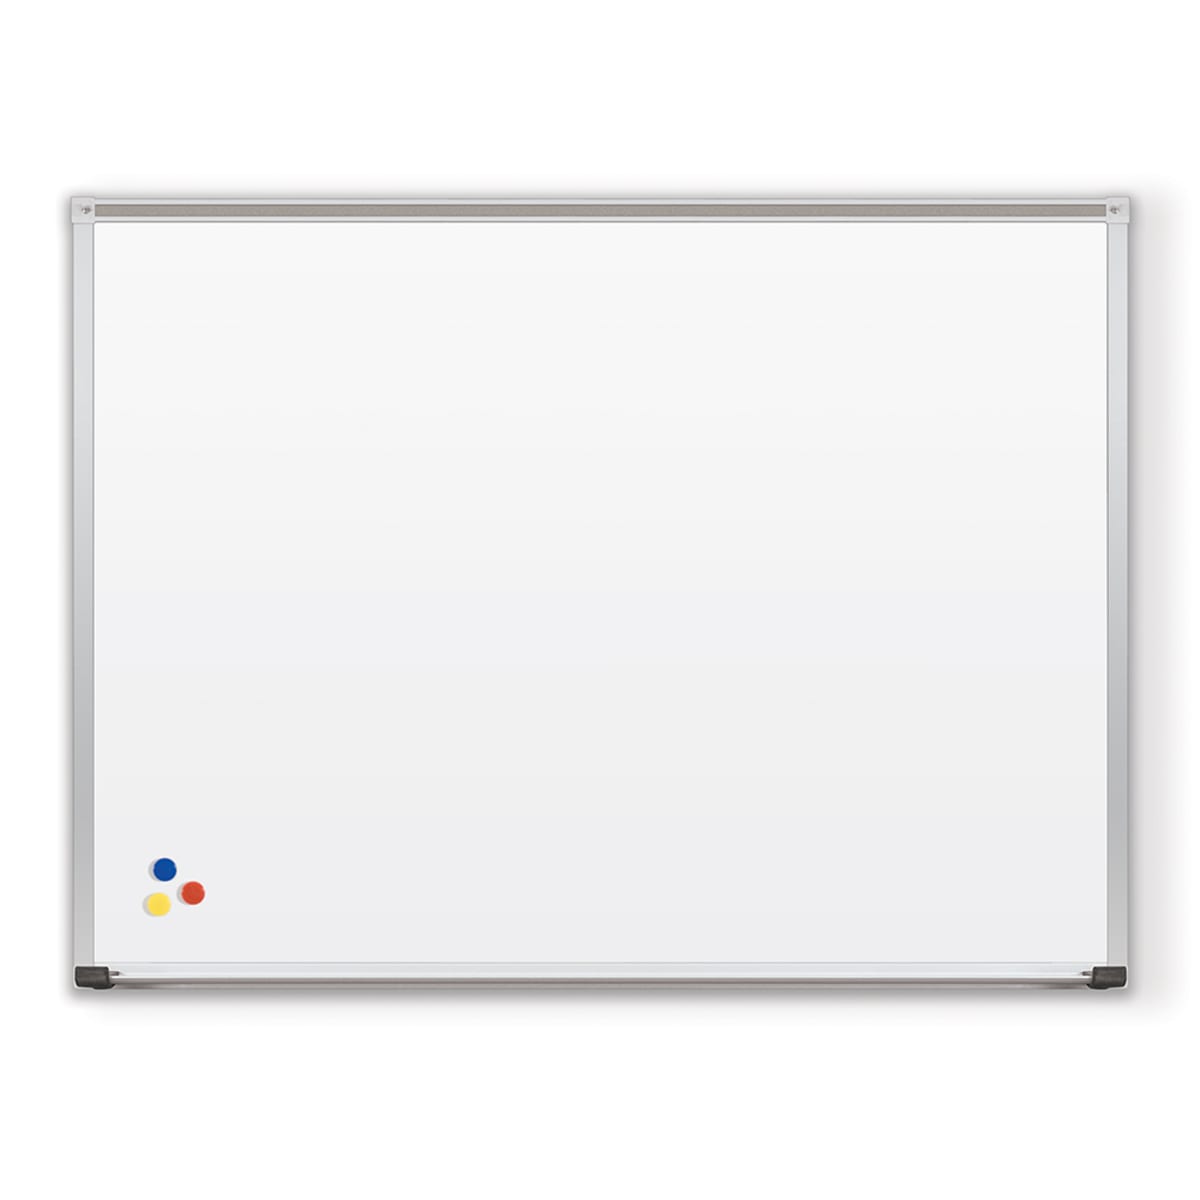 Mooreco Porcelain Markerboard with Deluxe Aluminum Trim - 4'H x 6'W (Mooreco 202AG) - SchoolOutlet